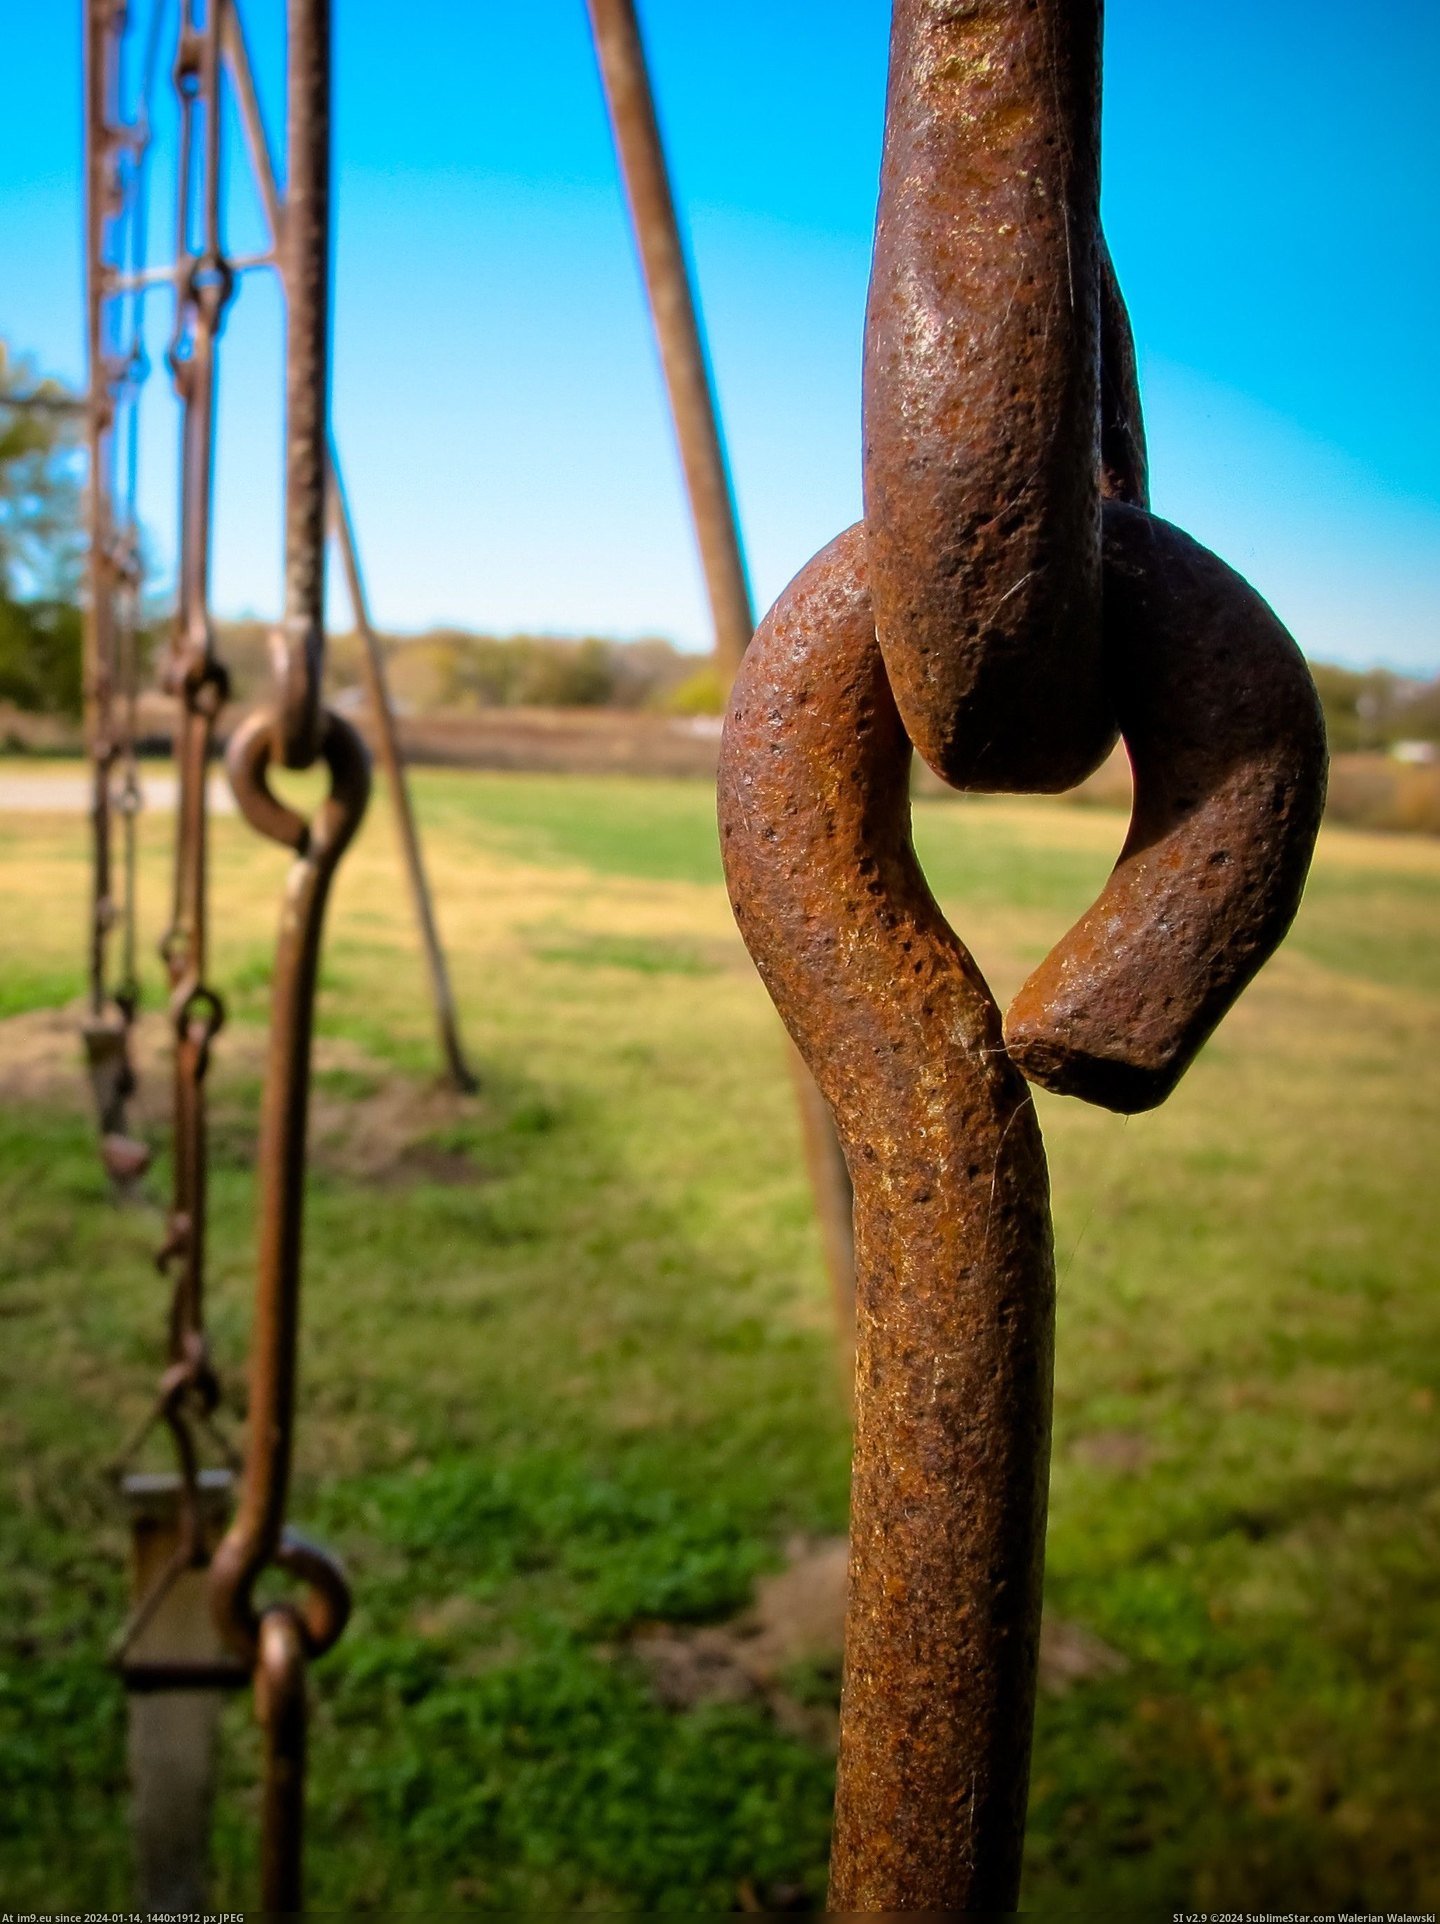 #Old #School #But #Swing #Chains #Hooks #Abandoned #Metal #Set [Pics] I found an old swing set at an abandoned school that didn't have chains, but metal hooks. Pic. (Bild von album My r/PICS favs))